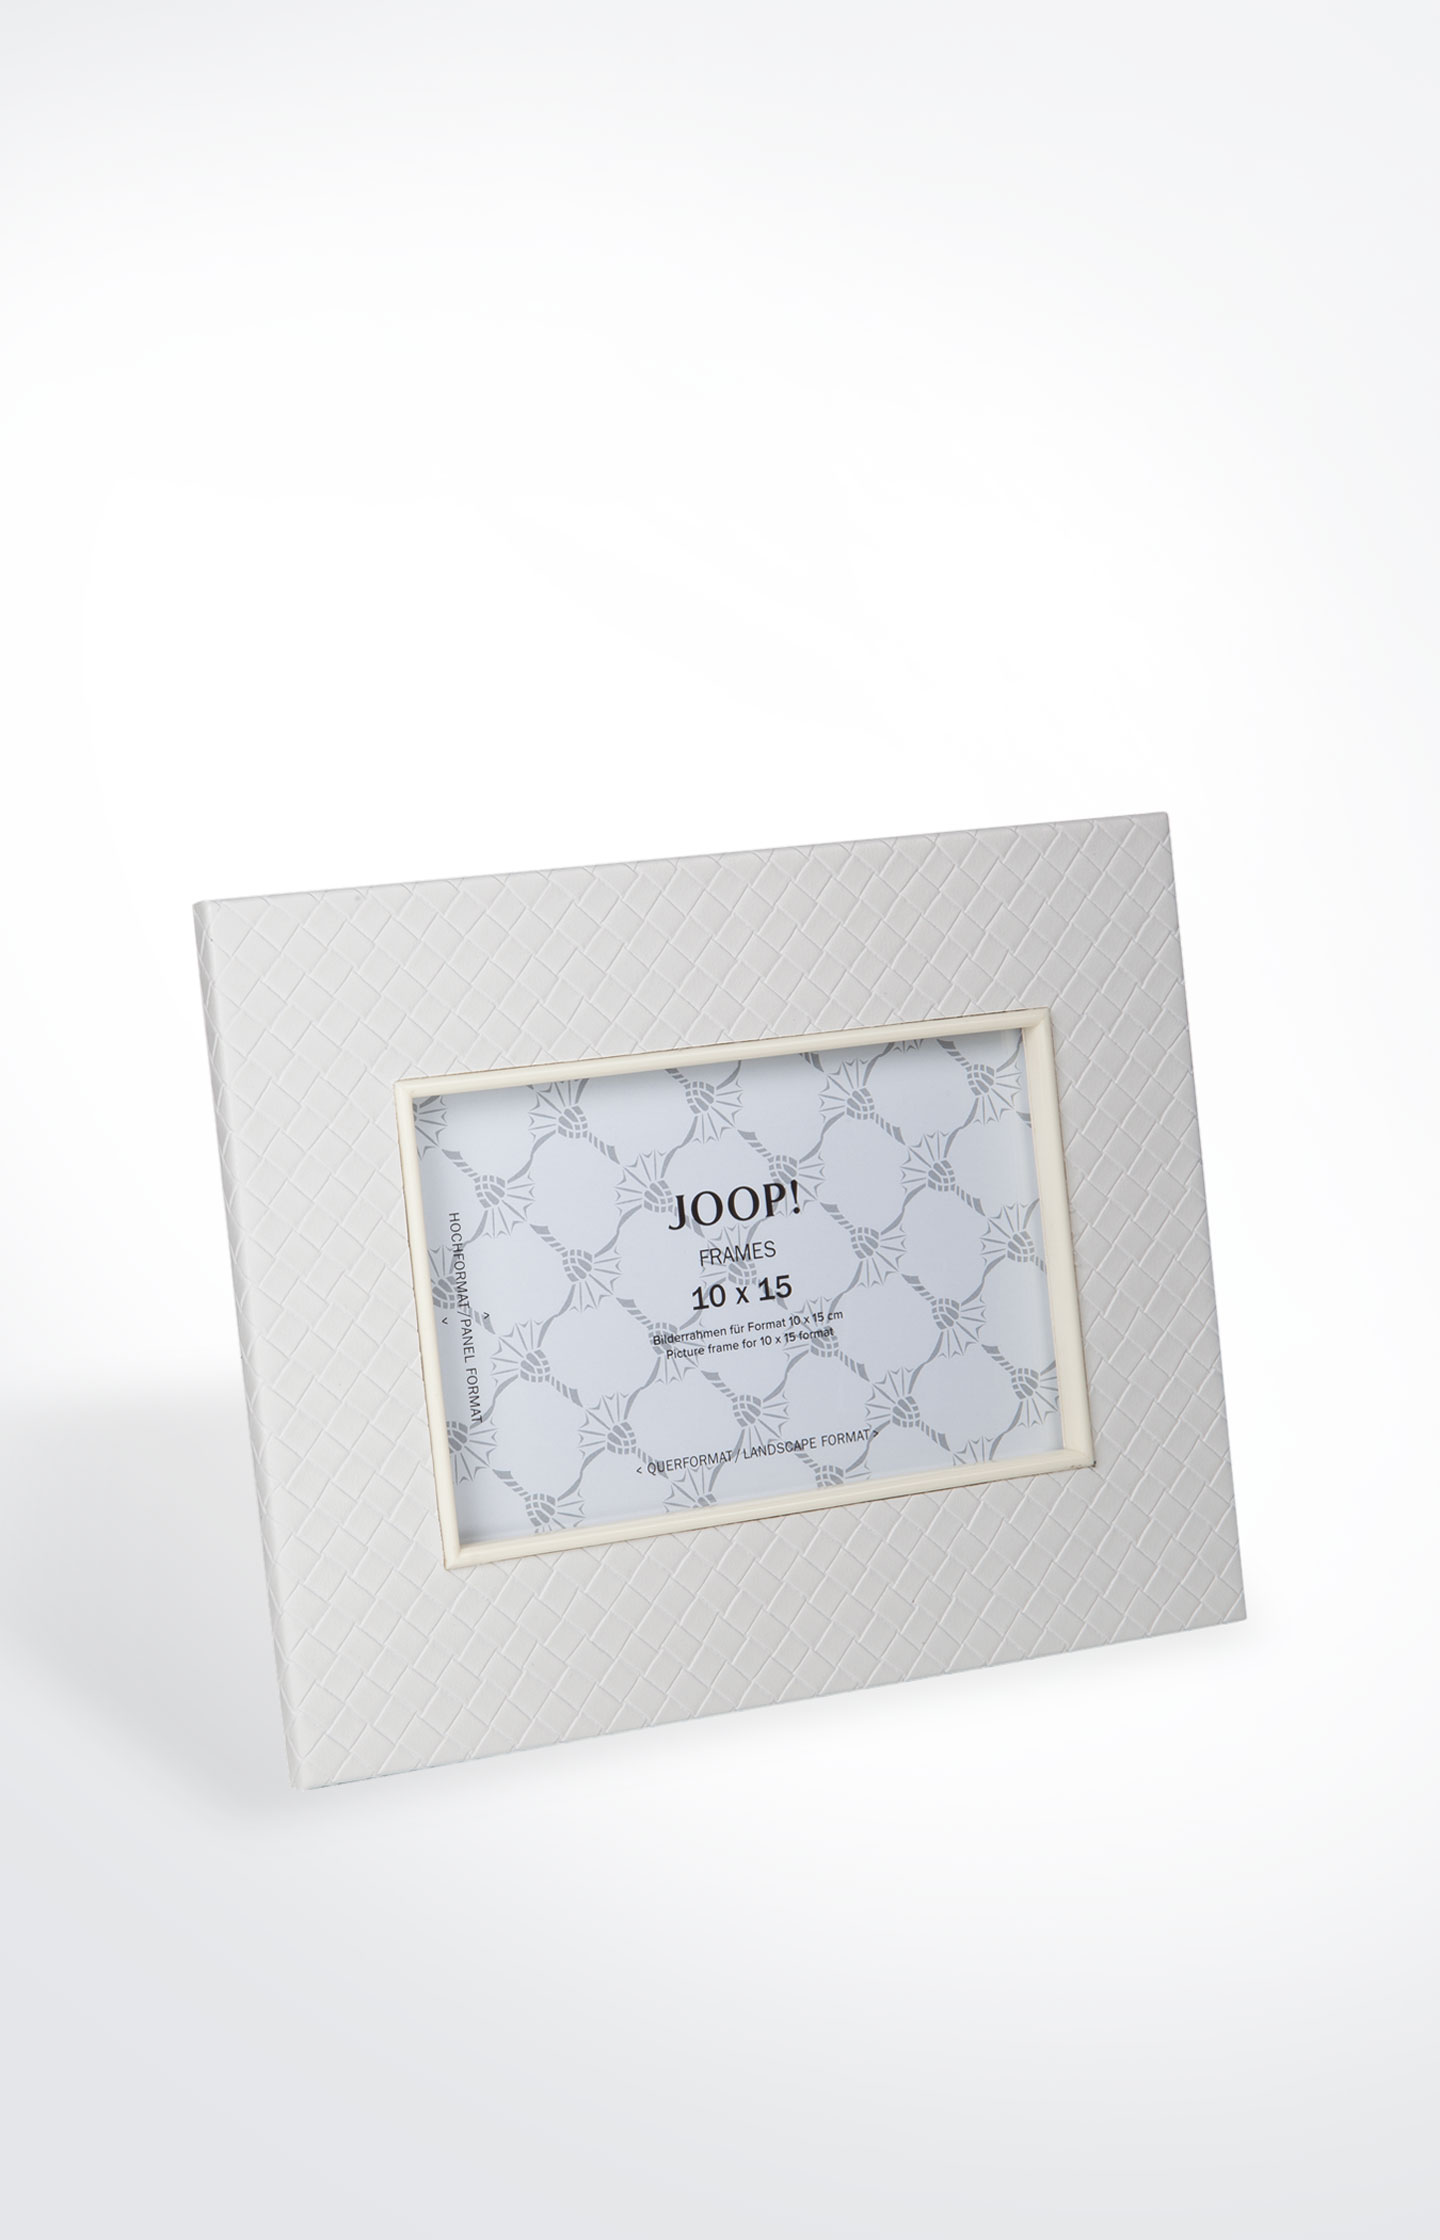 cm - 10 Online picture in the white frame Shop JOOP! 15 (for photos), Homeline x